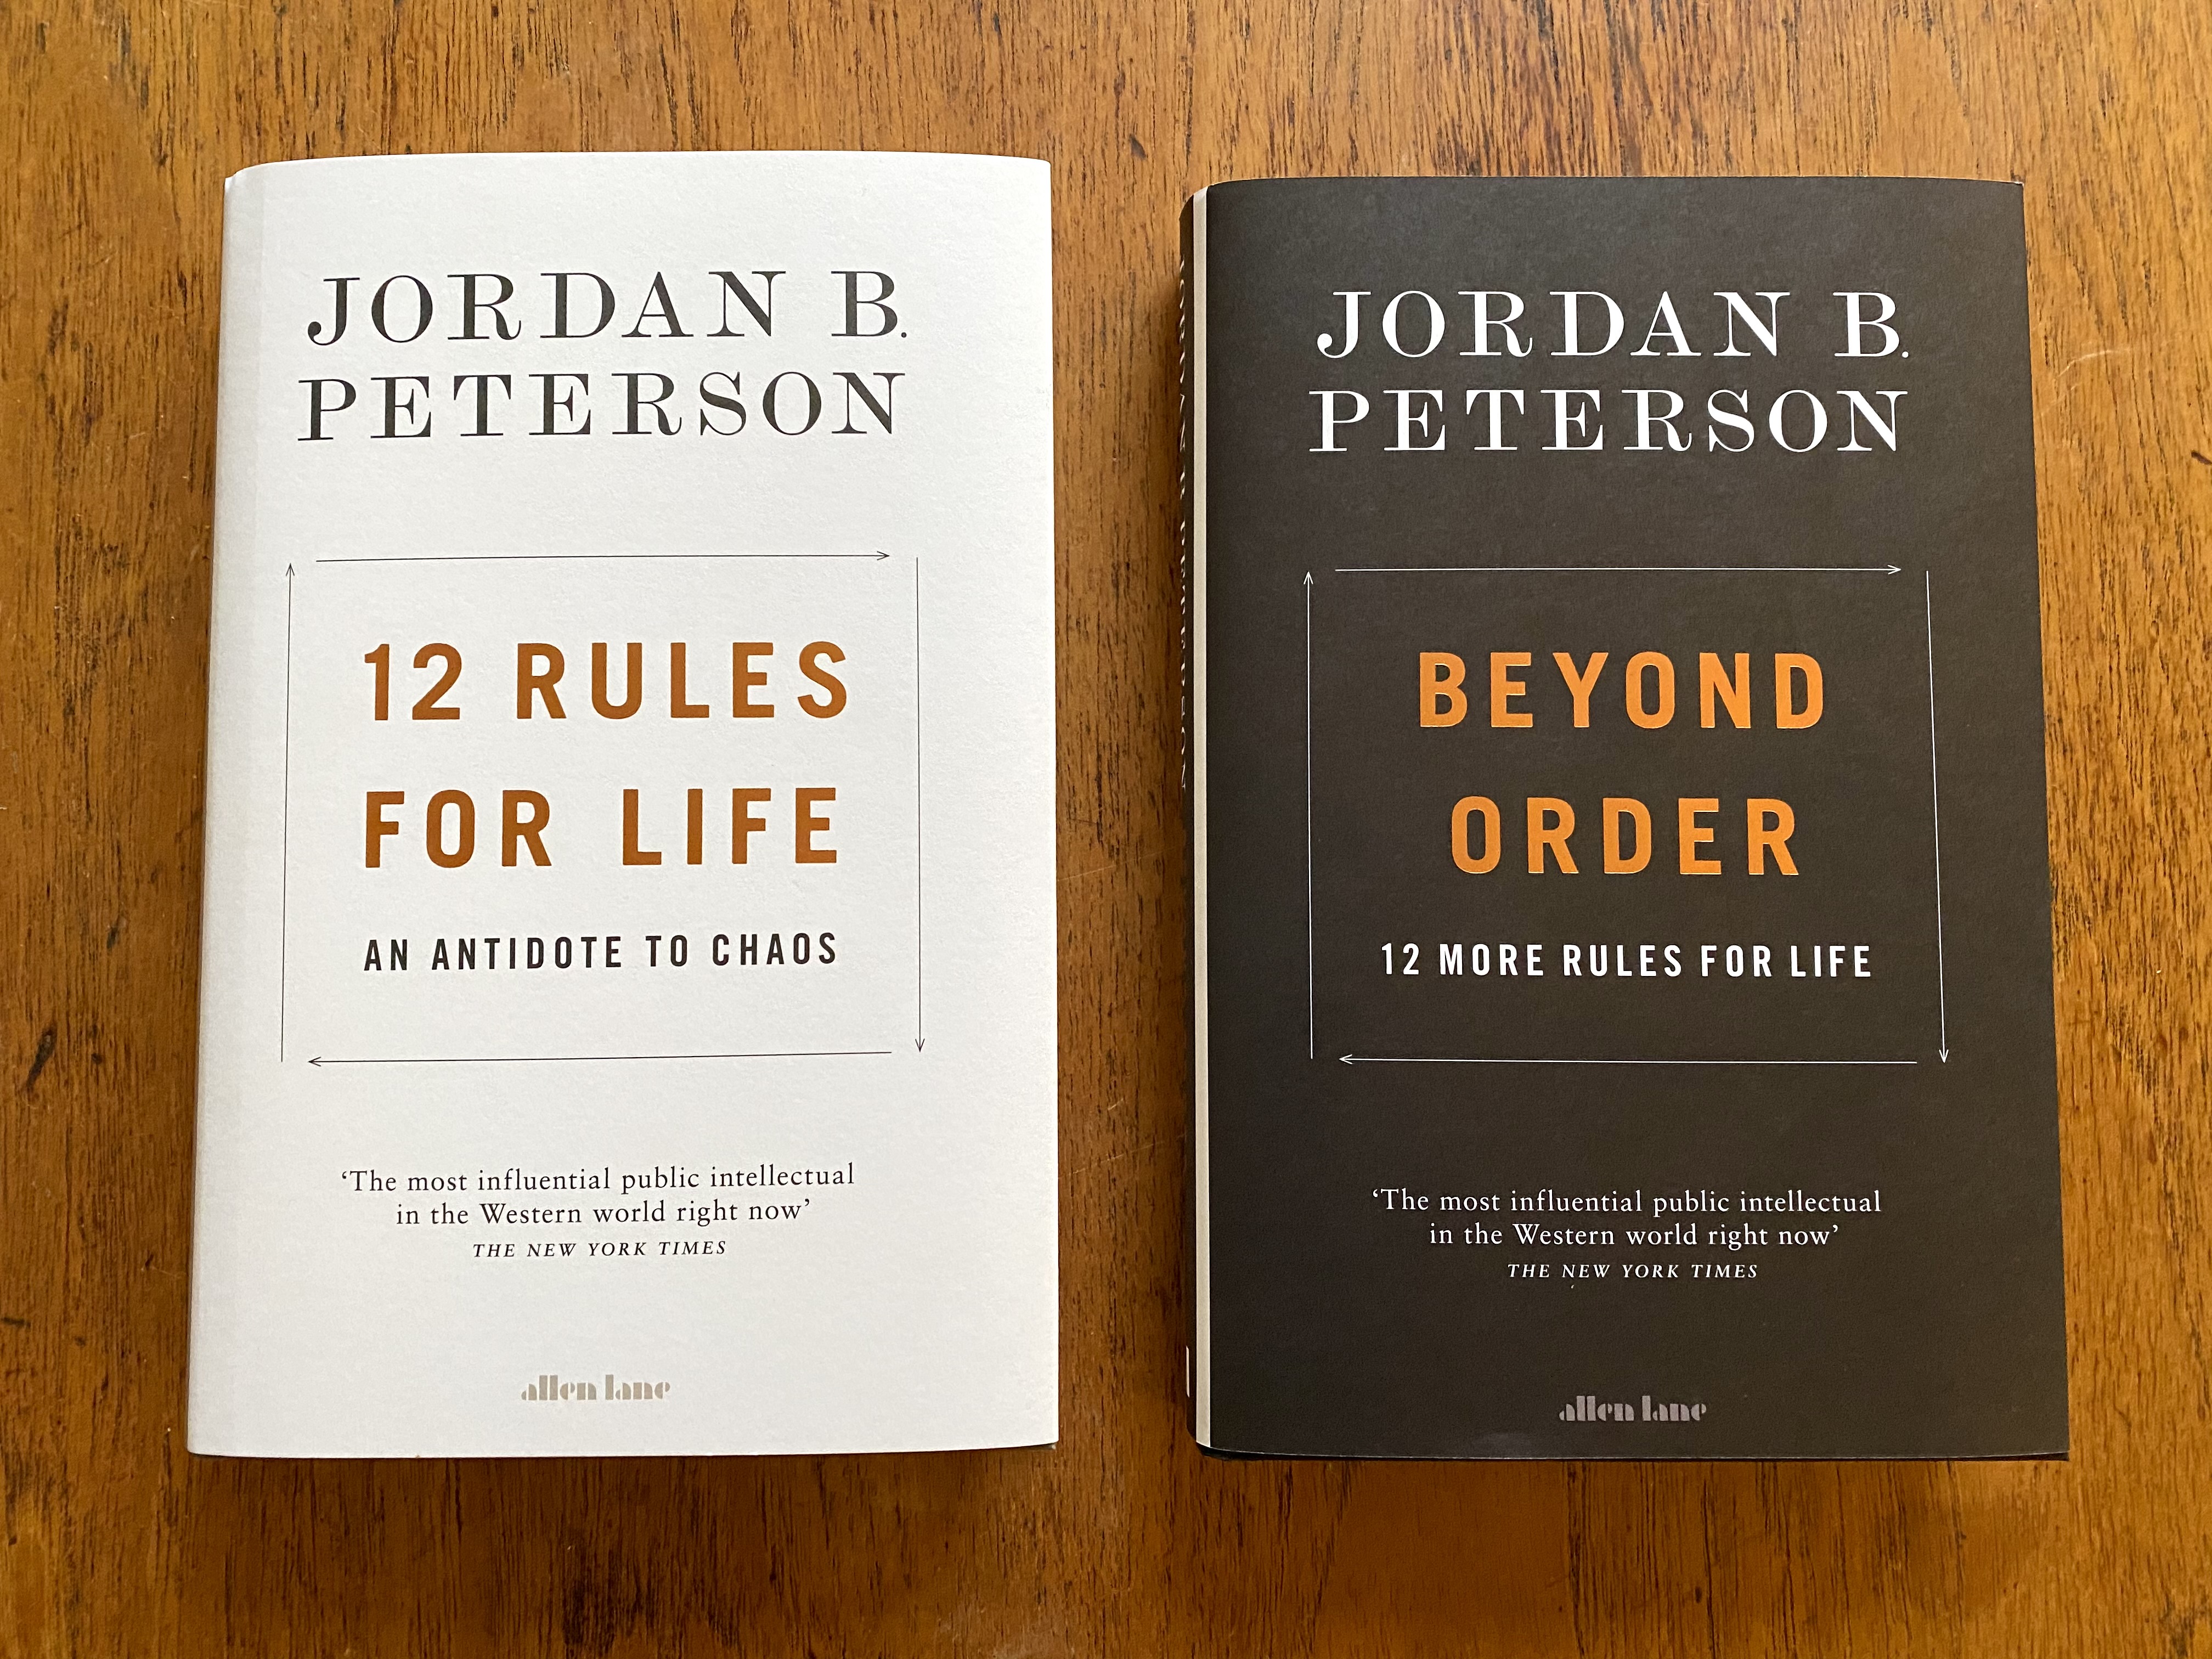 Gran universo Pino Monarca Dr Jordan B Peterson on Twitter: "My 2018 book 12 Rules for Life hit #1 on  the Globe and Mail Canadian bestseller list this weekend. Thanks to all my  readers (and viewers